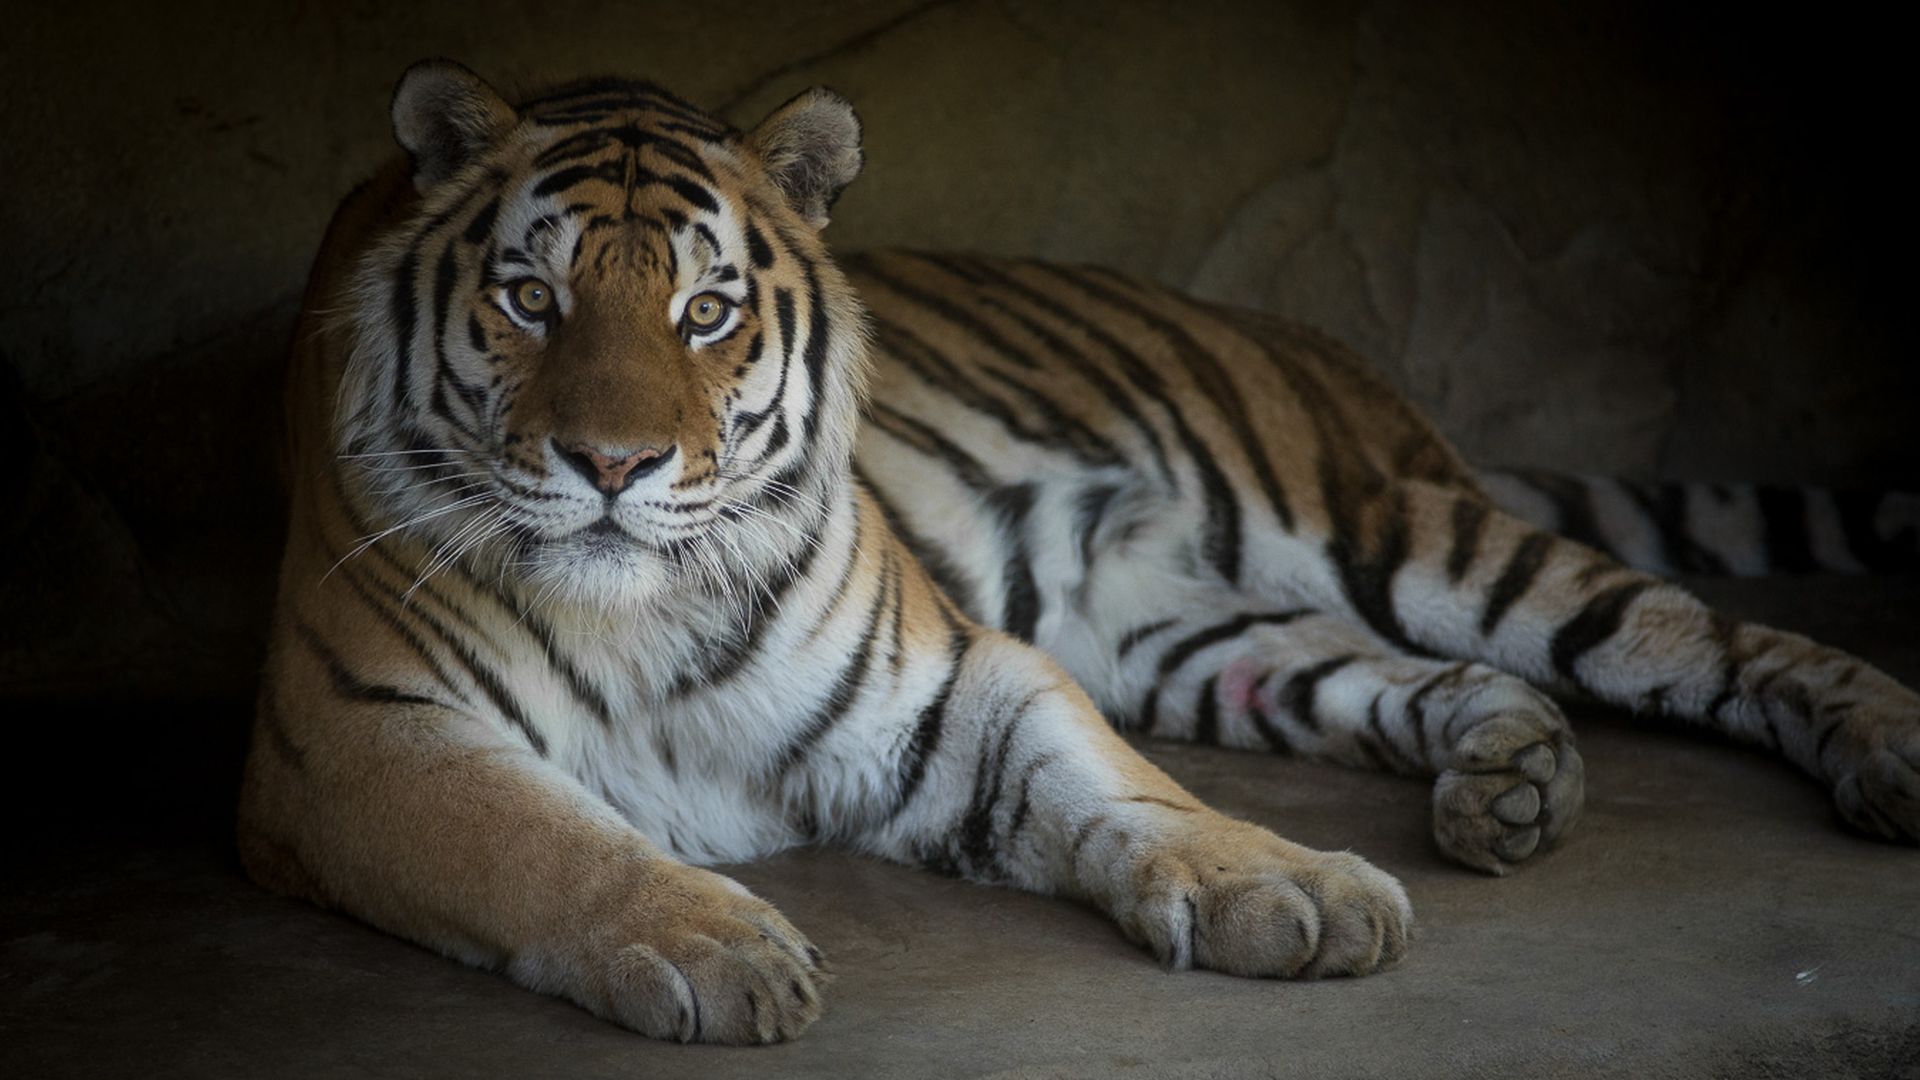 An Amur tiger rests in a cave